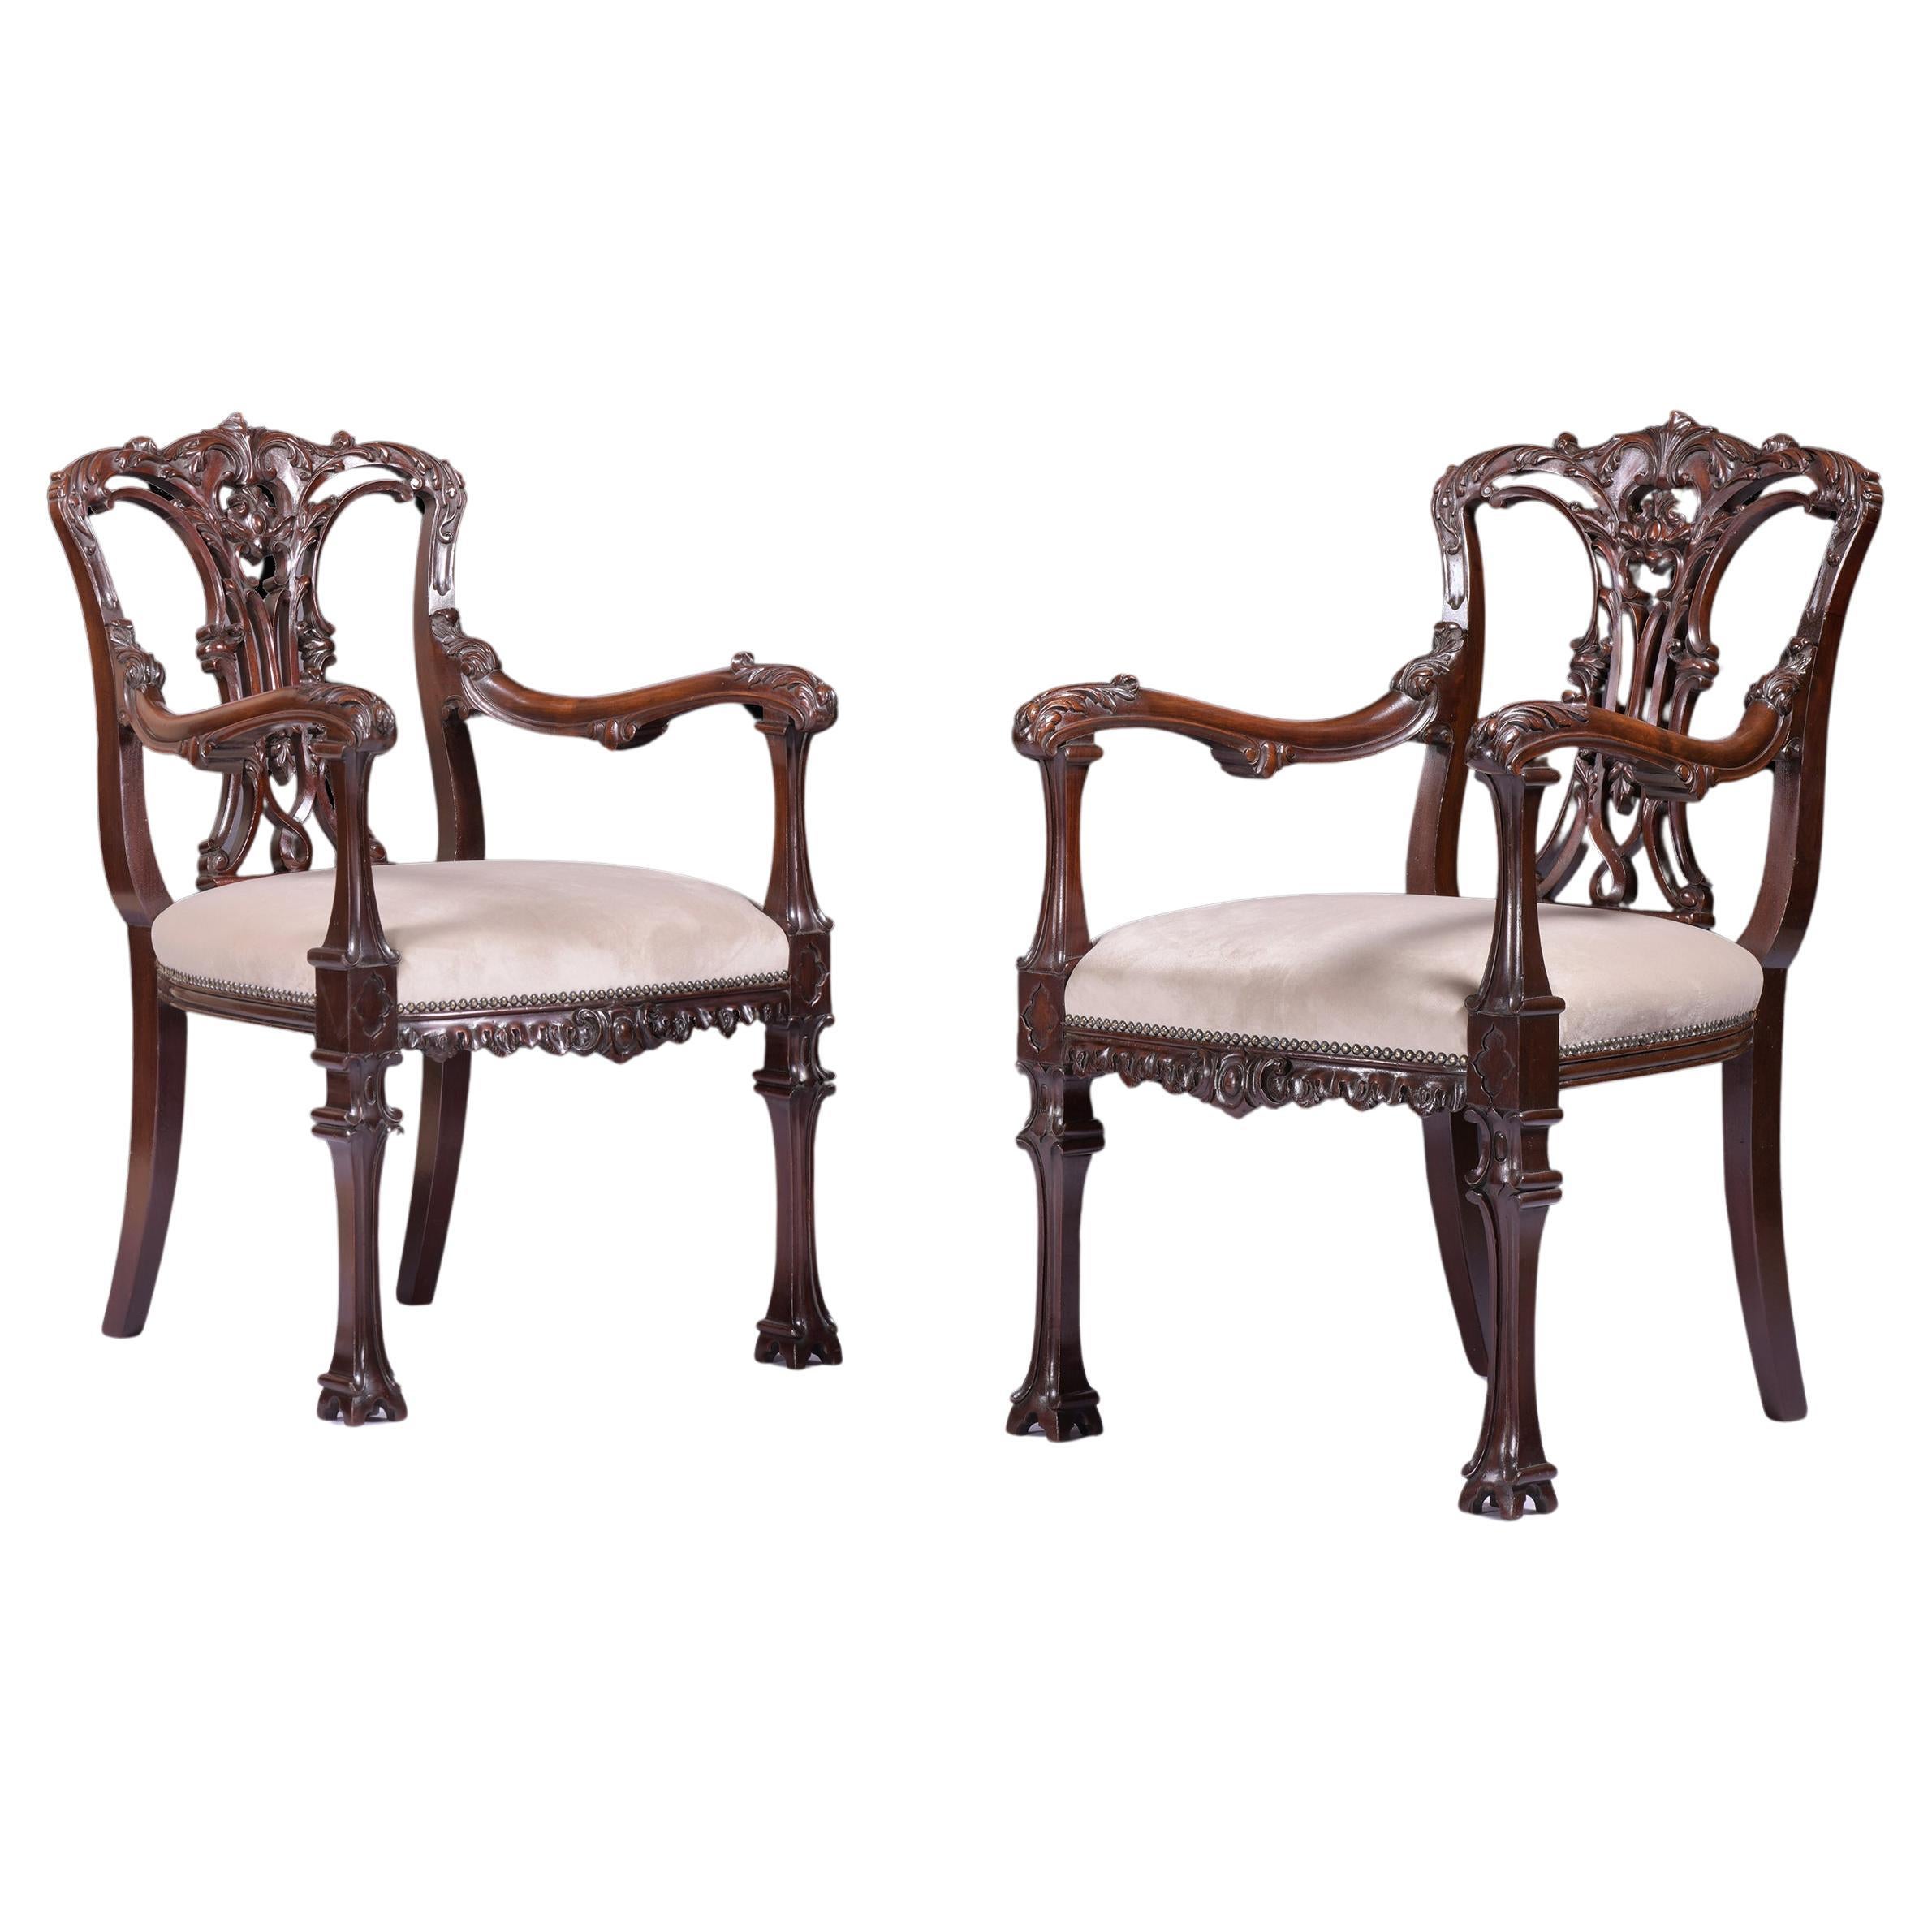 Pair Of 19th Century English Armchairs In The Chinese Chippendale Style